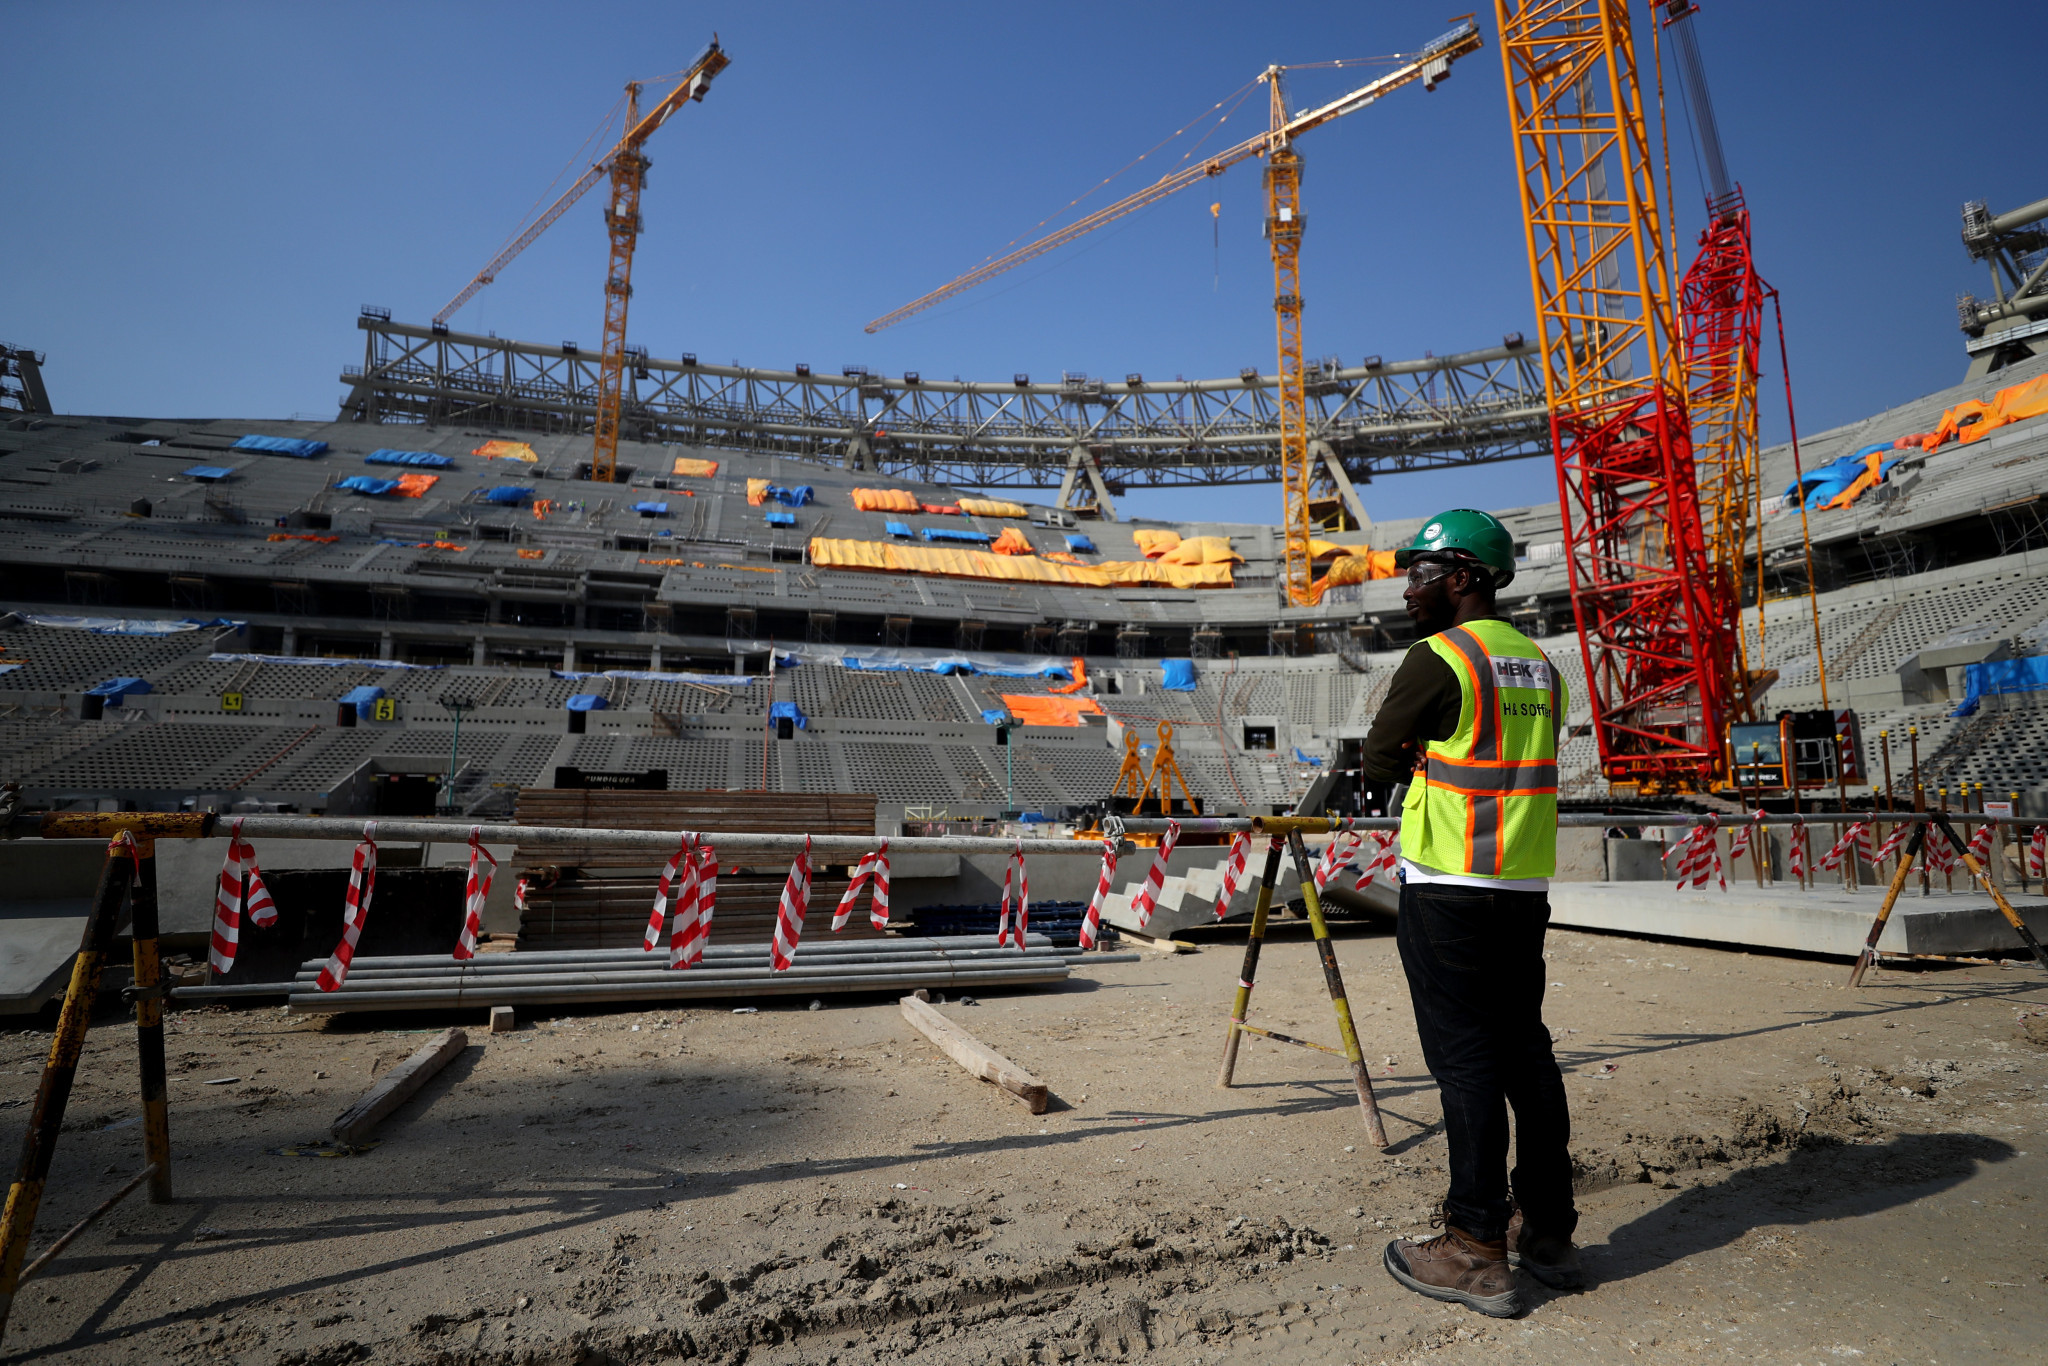 Qatar 2022 has cut part of its World Cup workforce due to the economic pressures of the coronavirus pandemic ©Getty Images